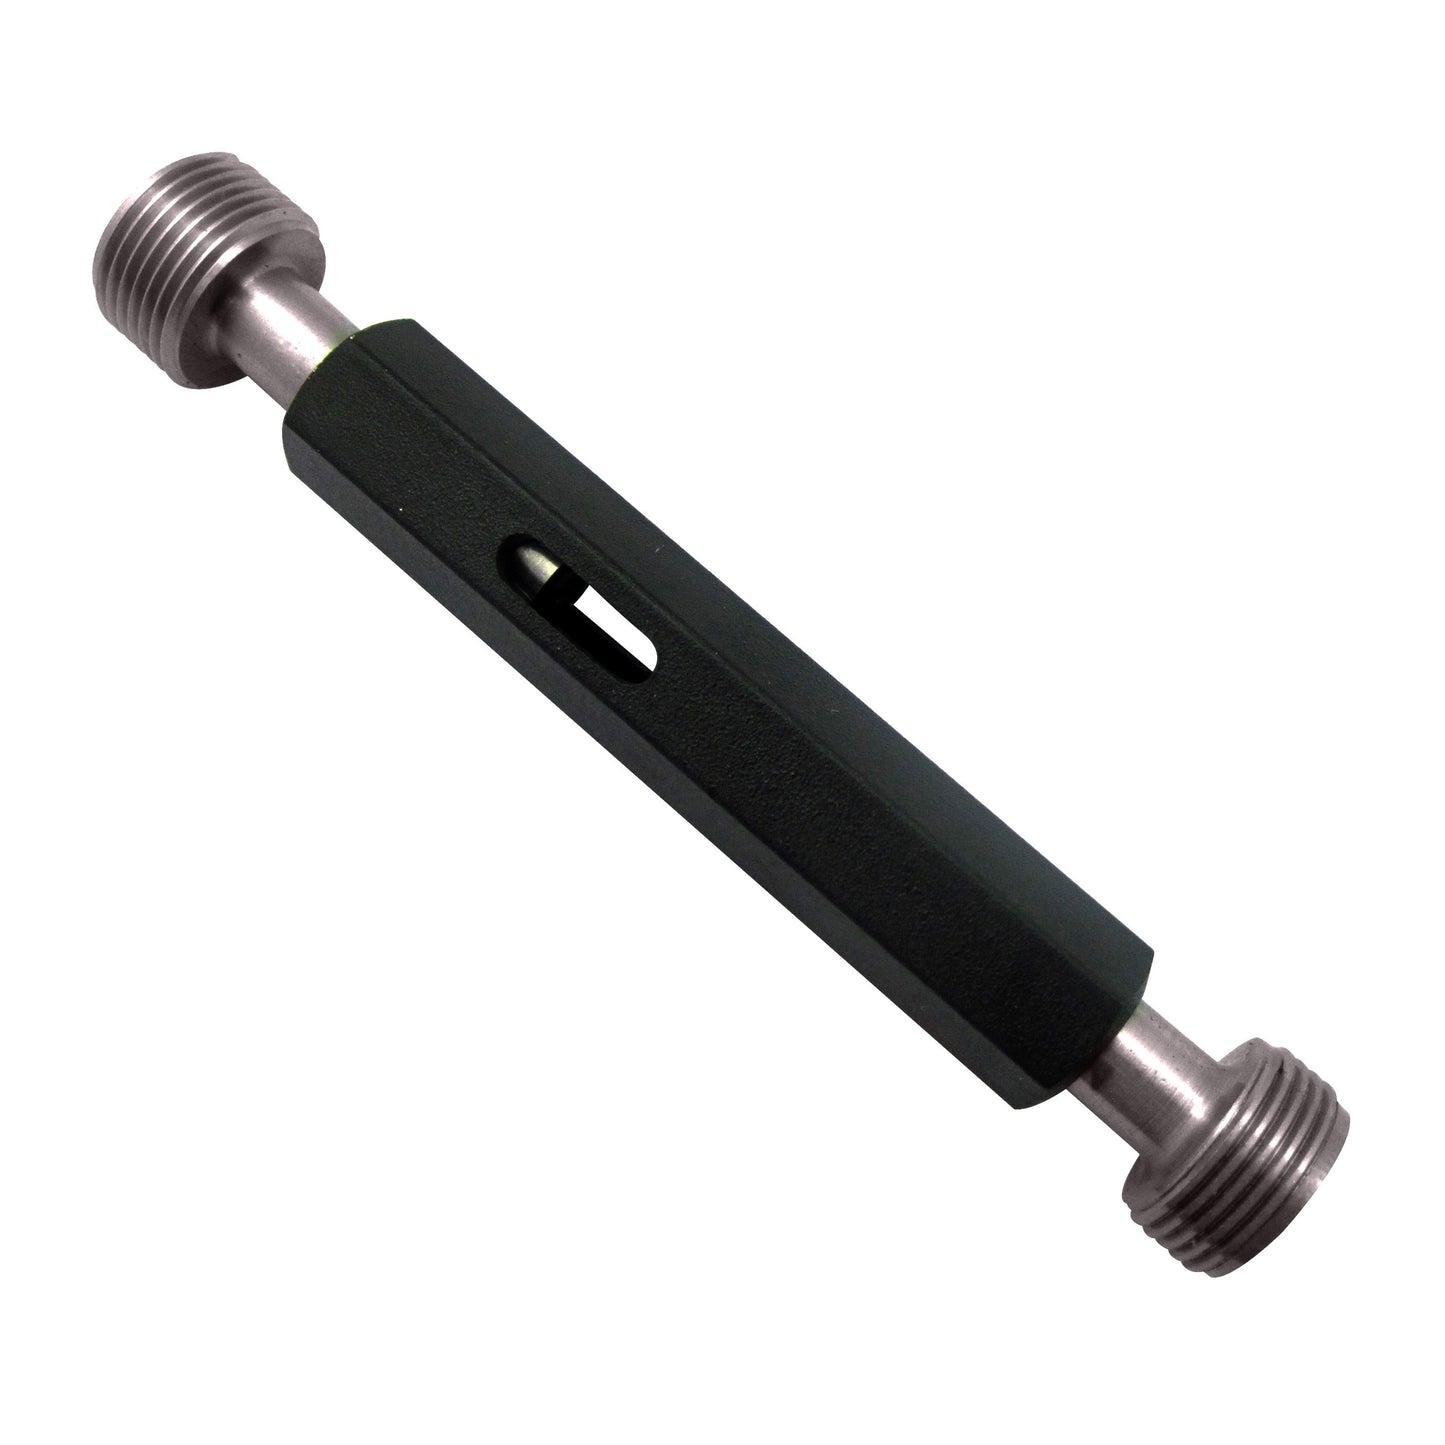 3/4" - 18 Unified Right Hand Thread Plug Gauge